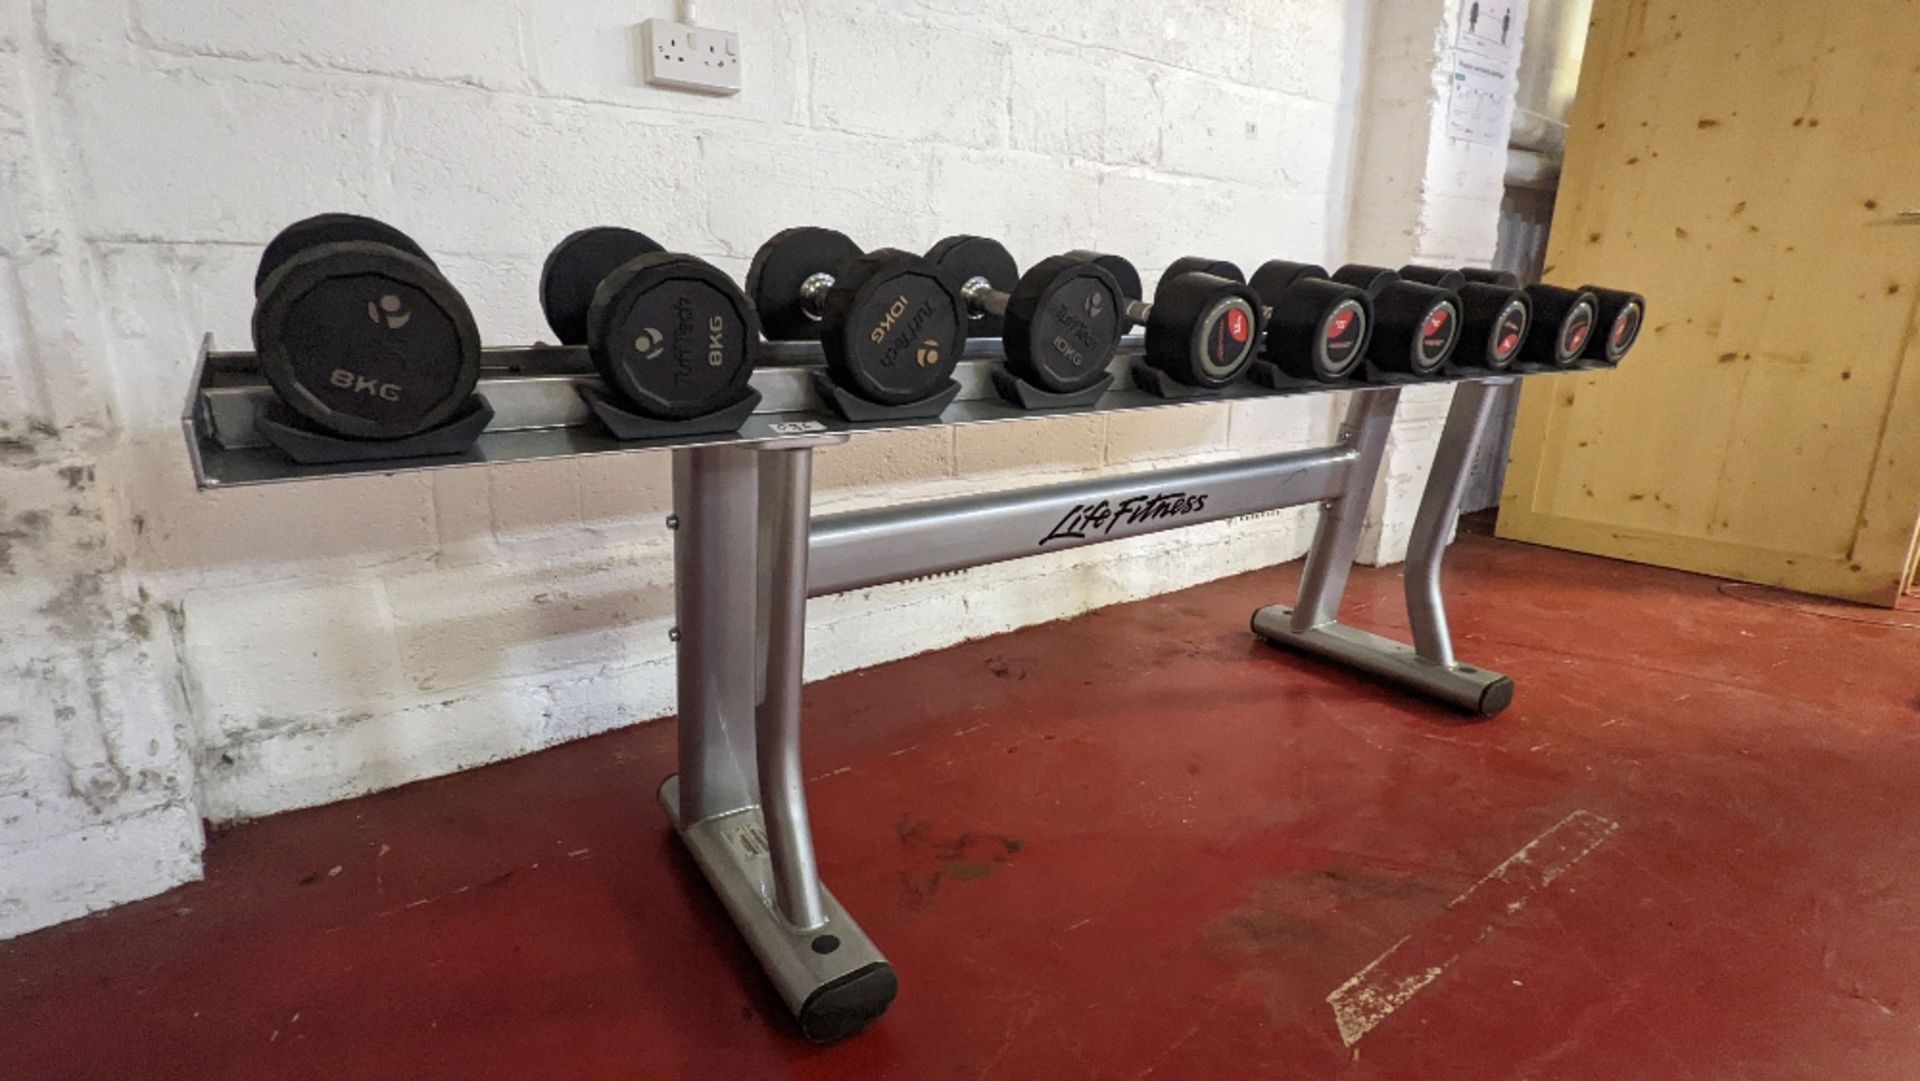 (3 Pairs) Life Fitness Dumbbells and (2 pairs) TuffTech Dumbbells with Life Fitness Rack - Image 5 of 6